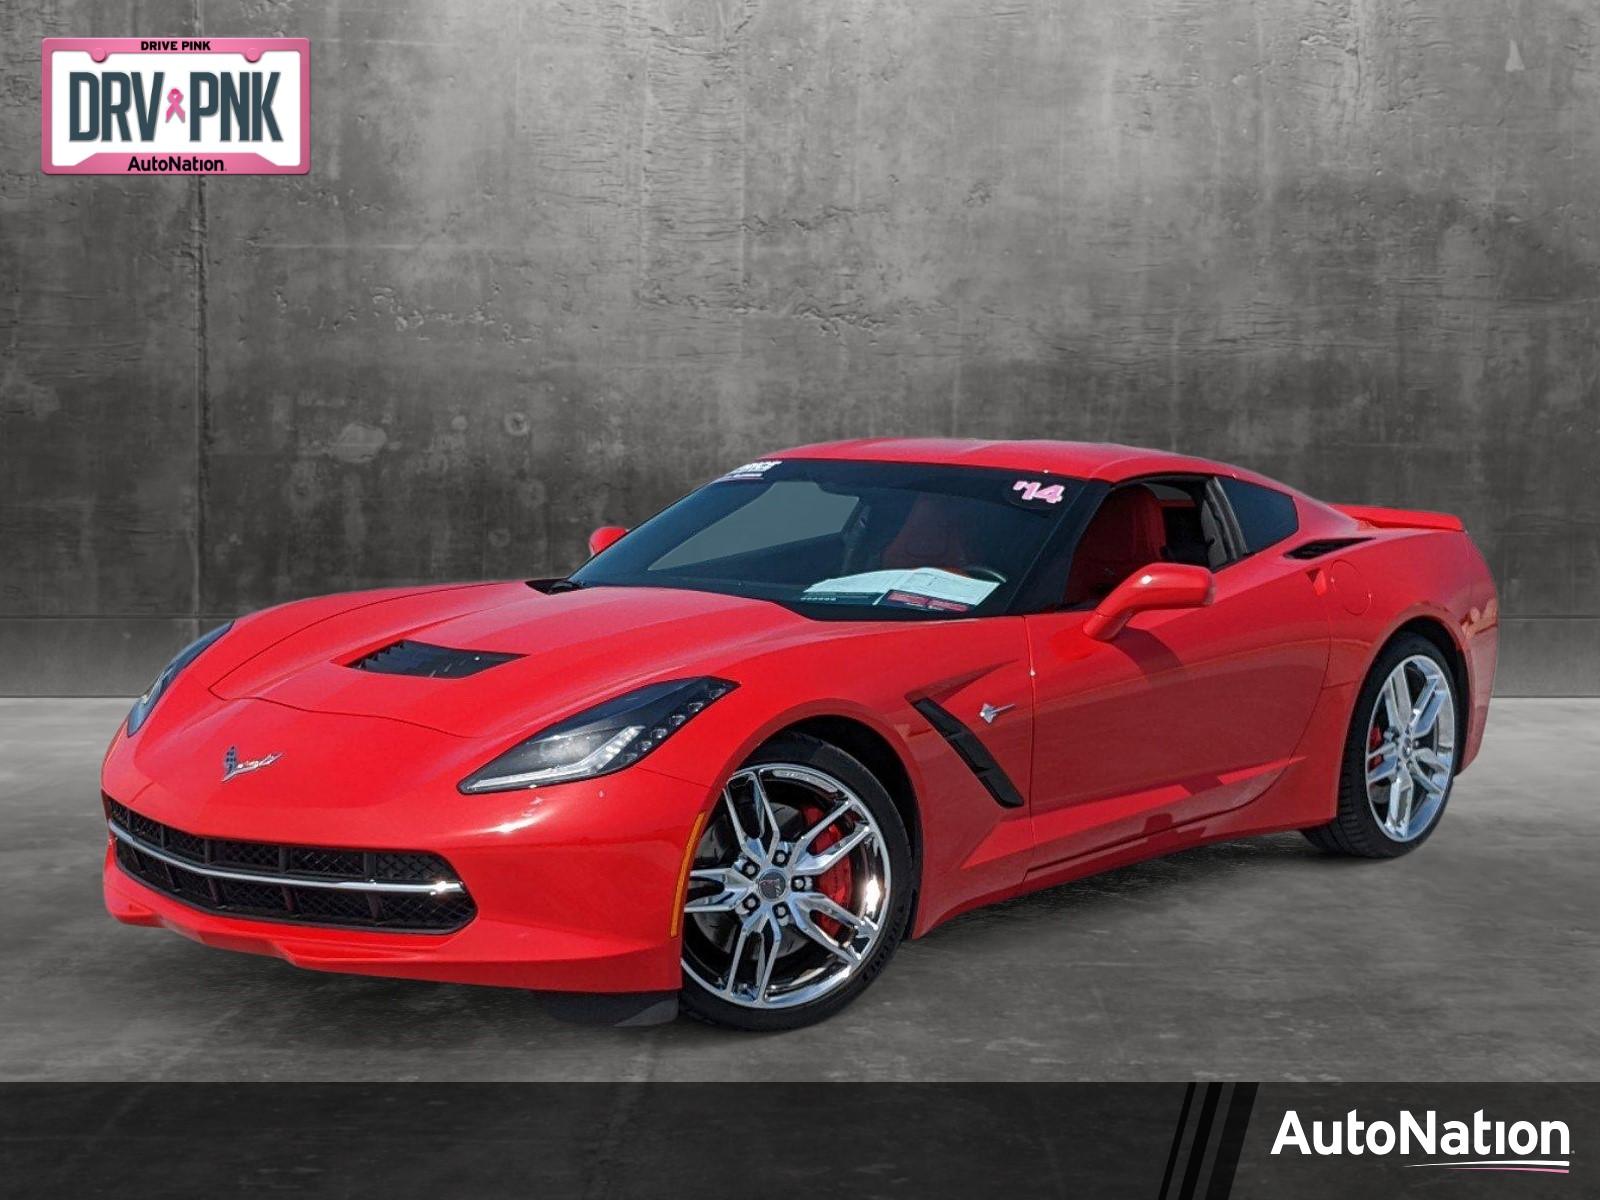 2014 Chevrolet Corvette Stingray Vehicle Photo in Clearwater, FL 33761